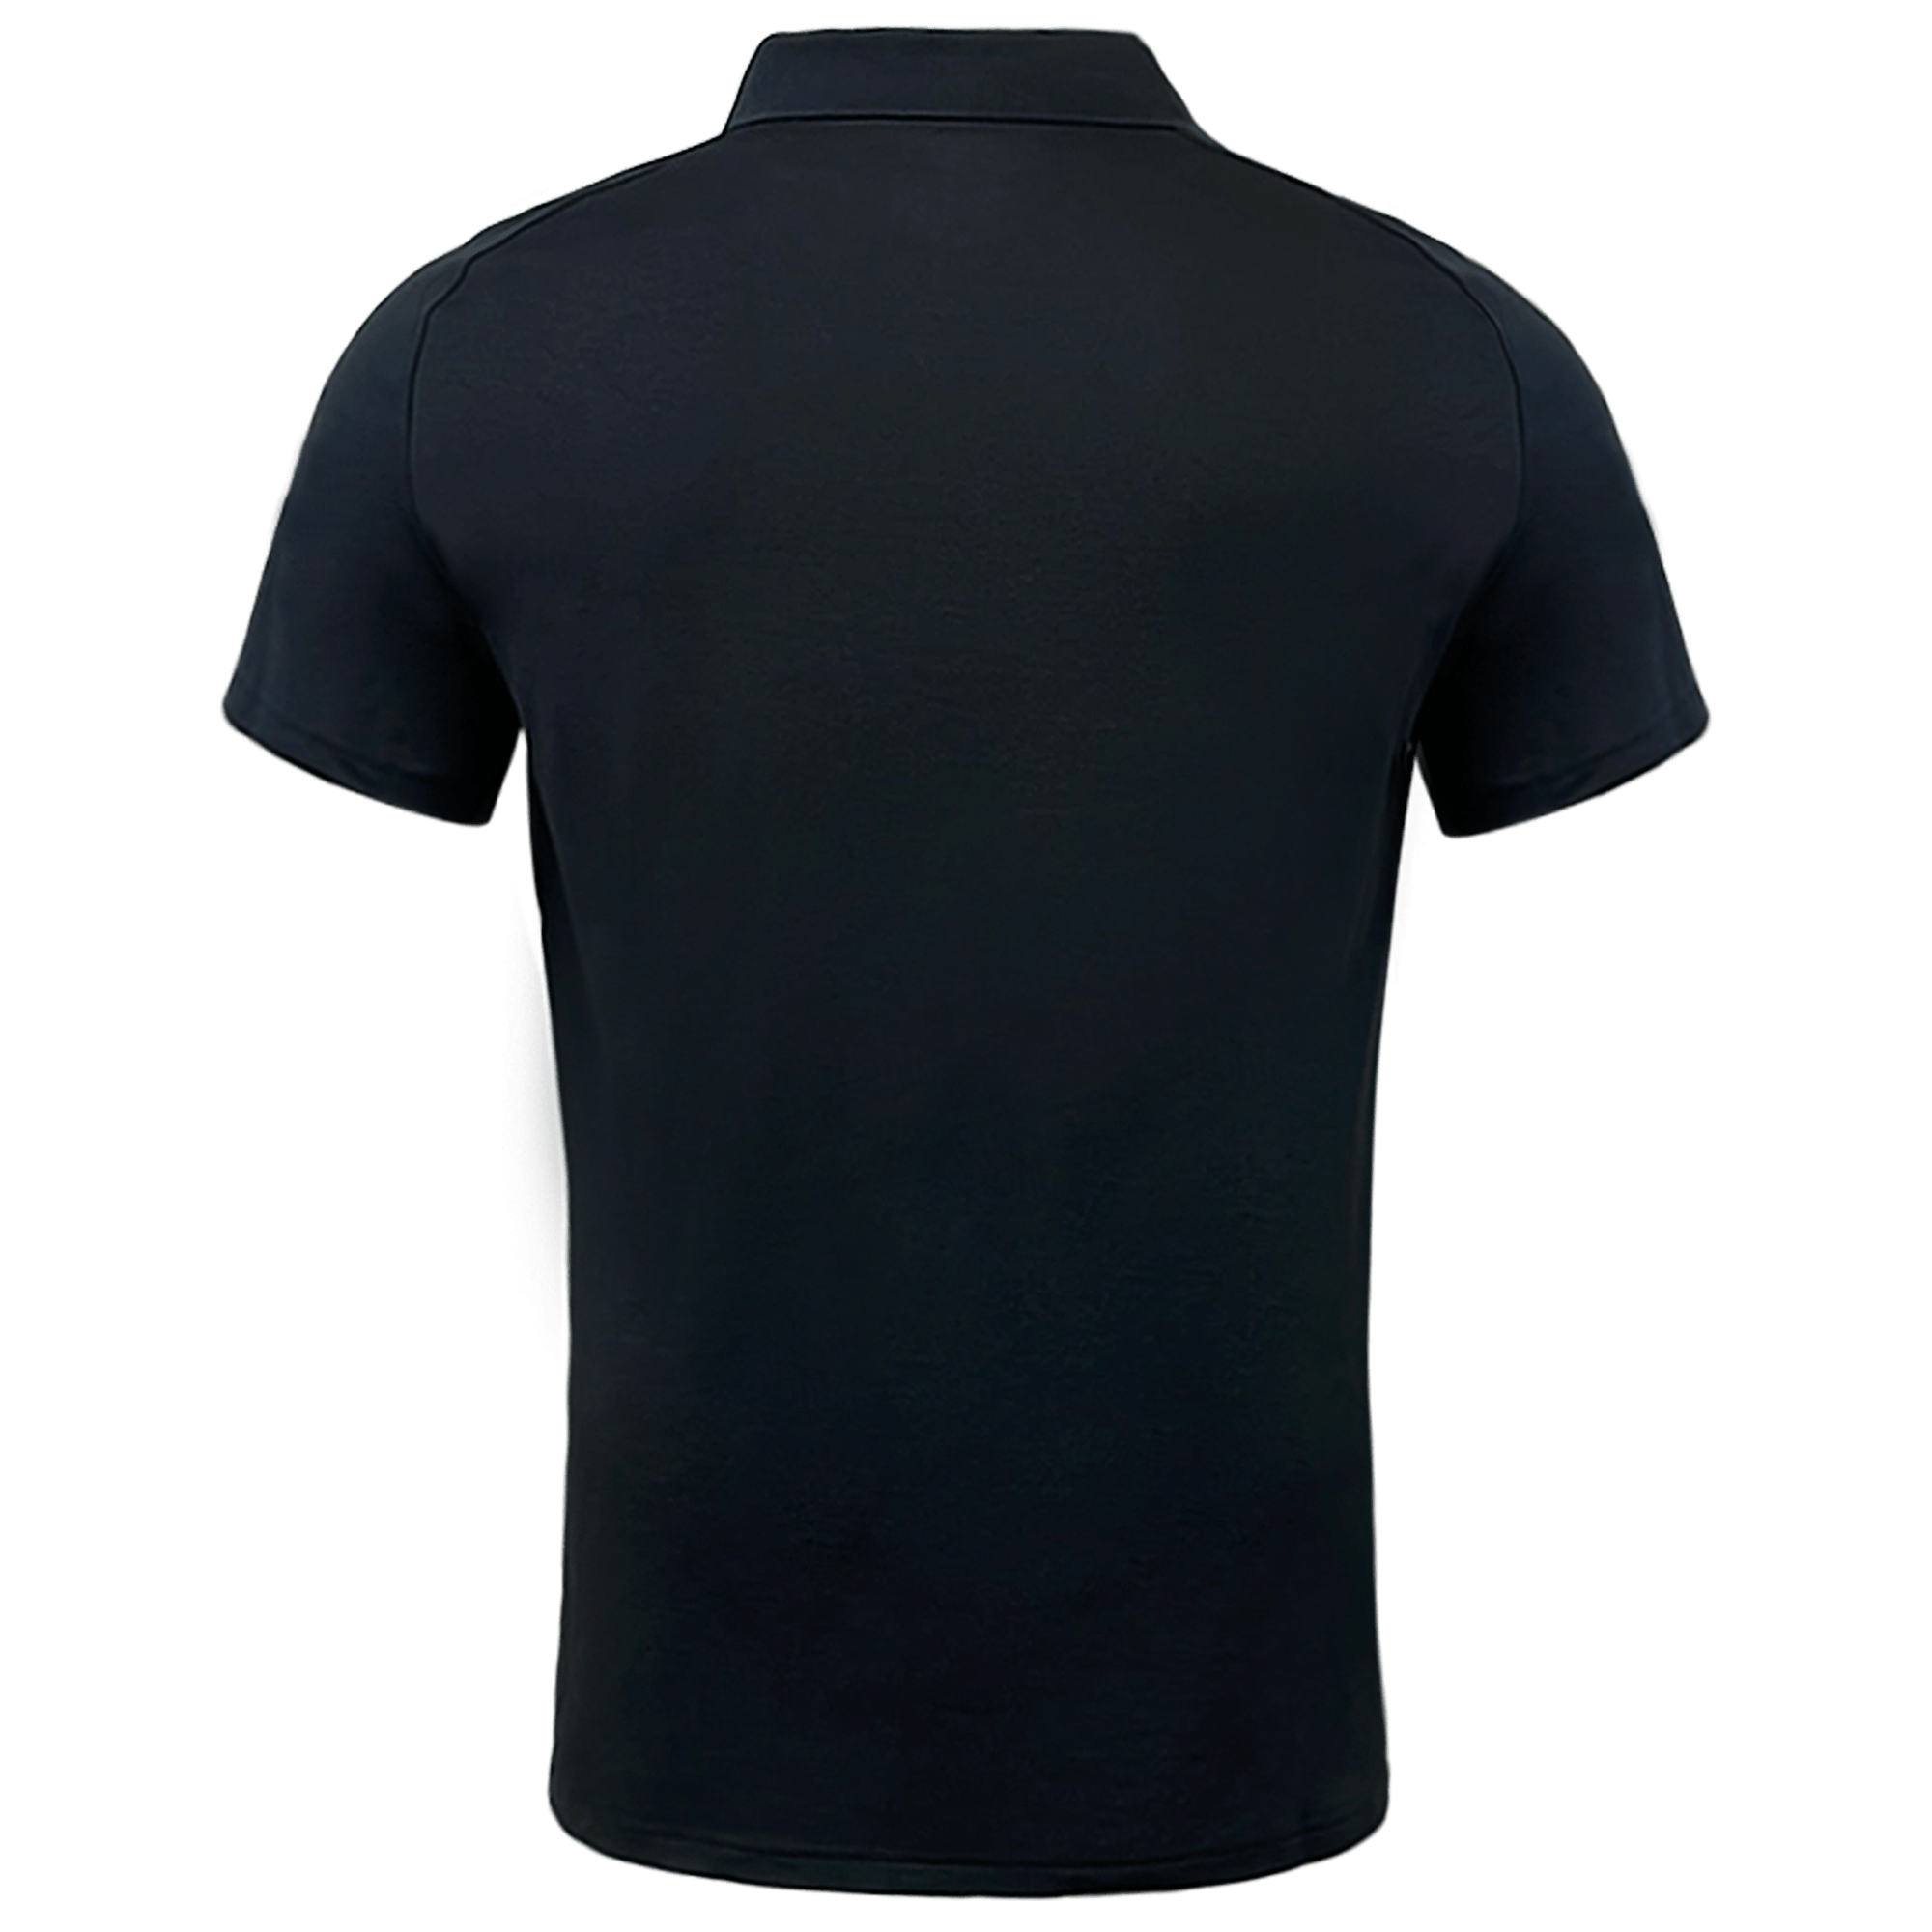 All Blacks Rugby Polo by adidas 22/23 | World Rugby Shop